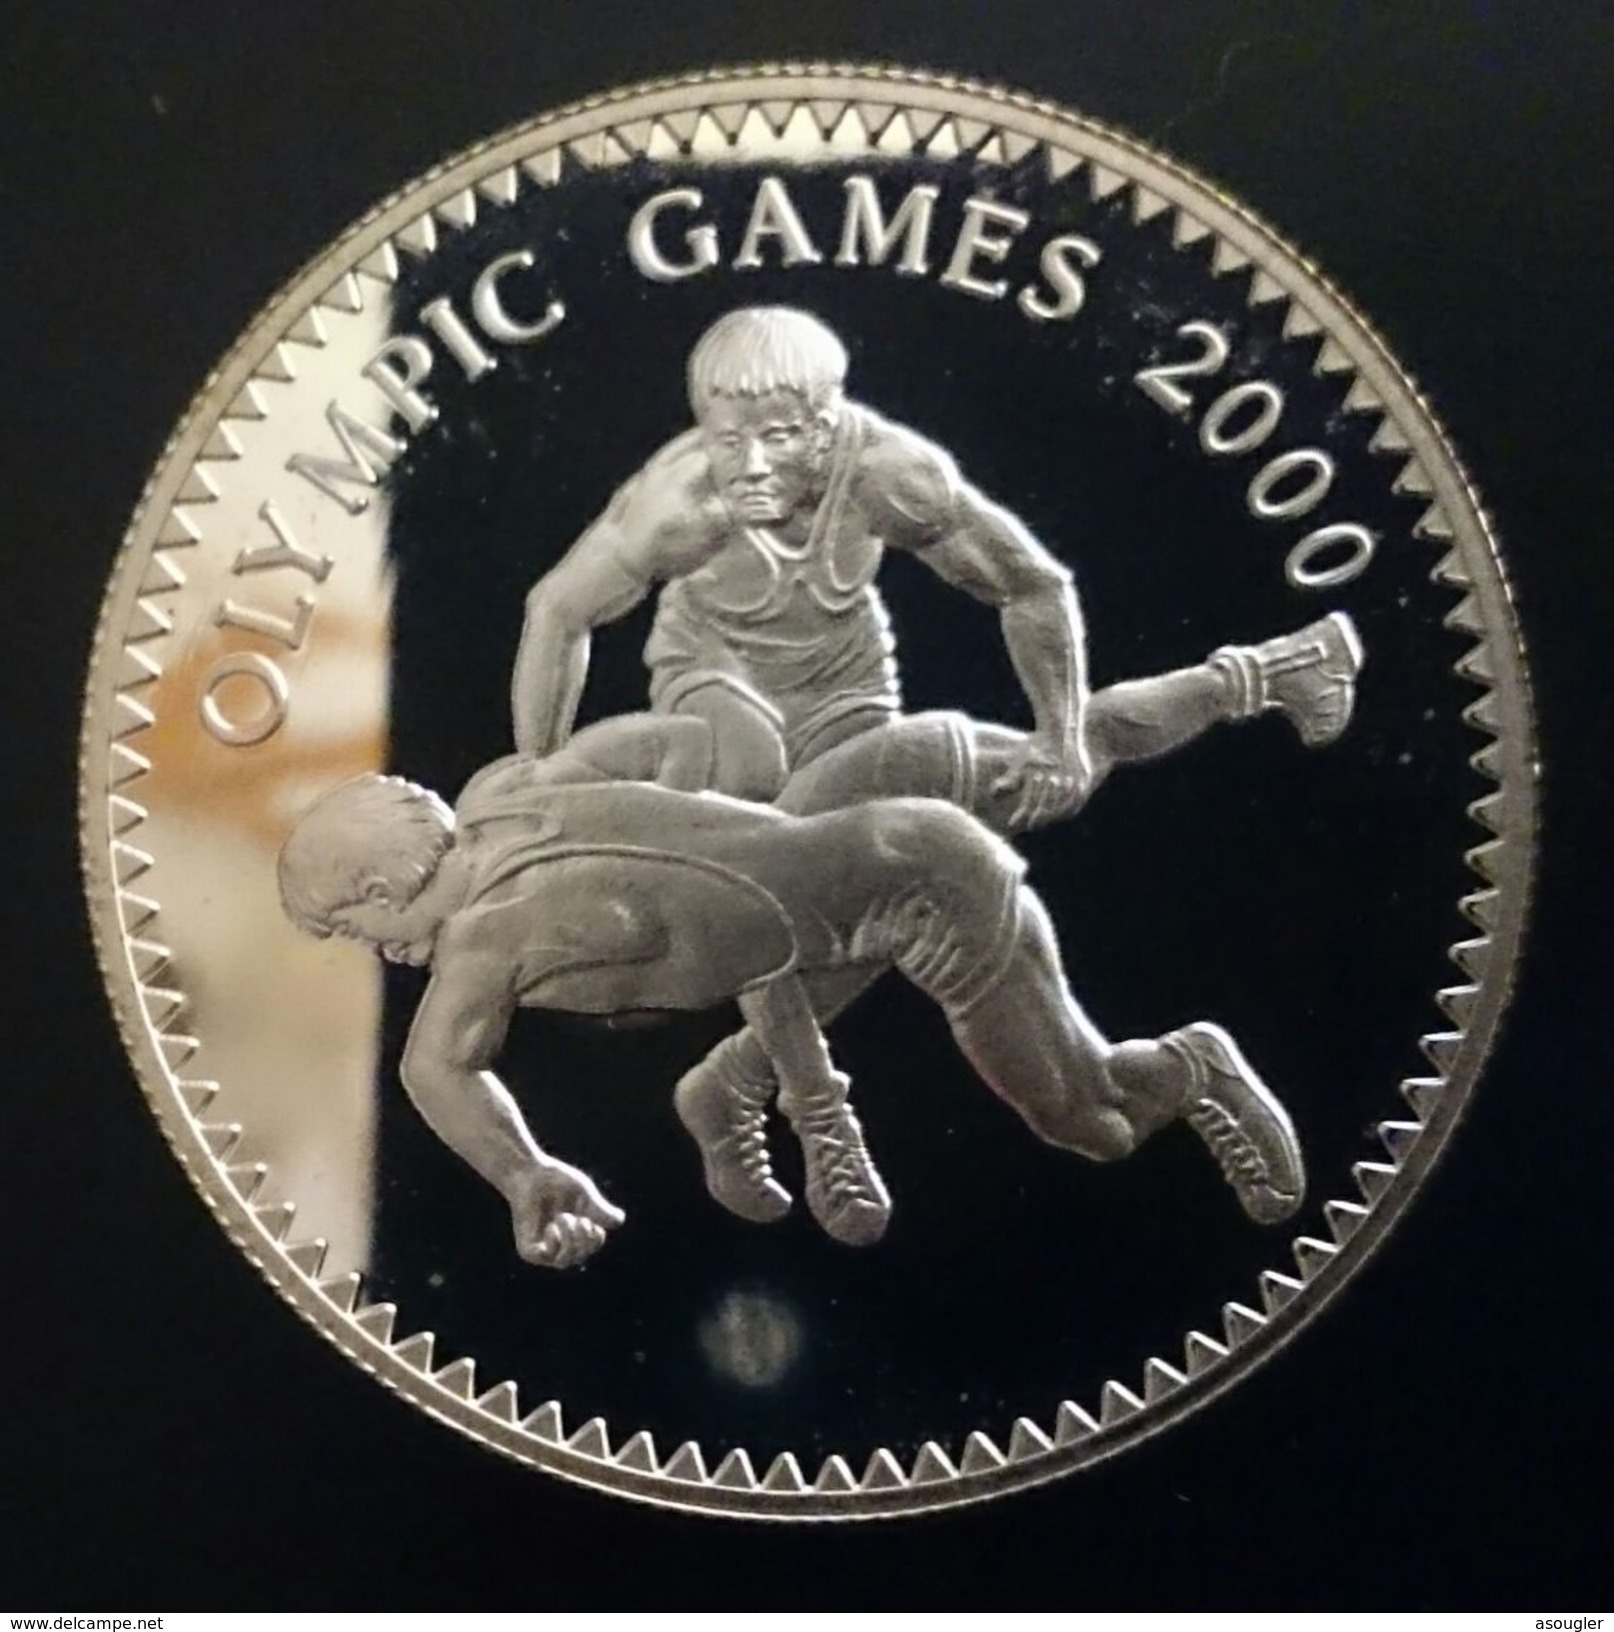 MONGOLIA 500 TUGRIK ND 1998 SILVER PROOF "2000 Olympics Games" Free Shipping Via Registered Air Mail - Mongolie